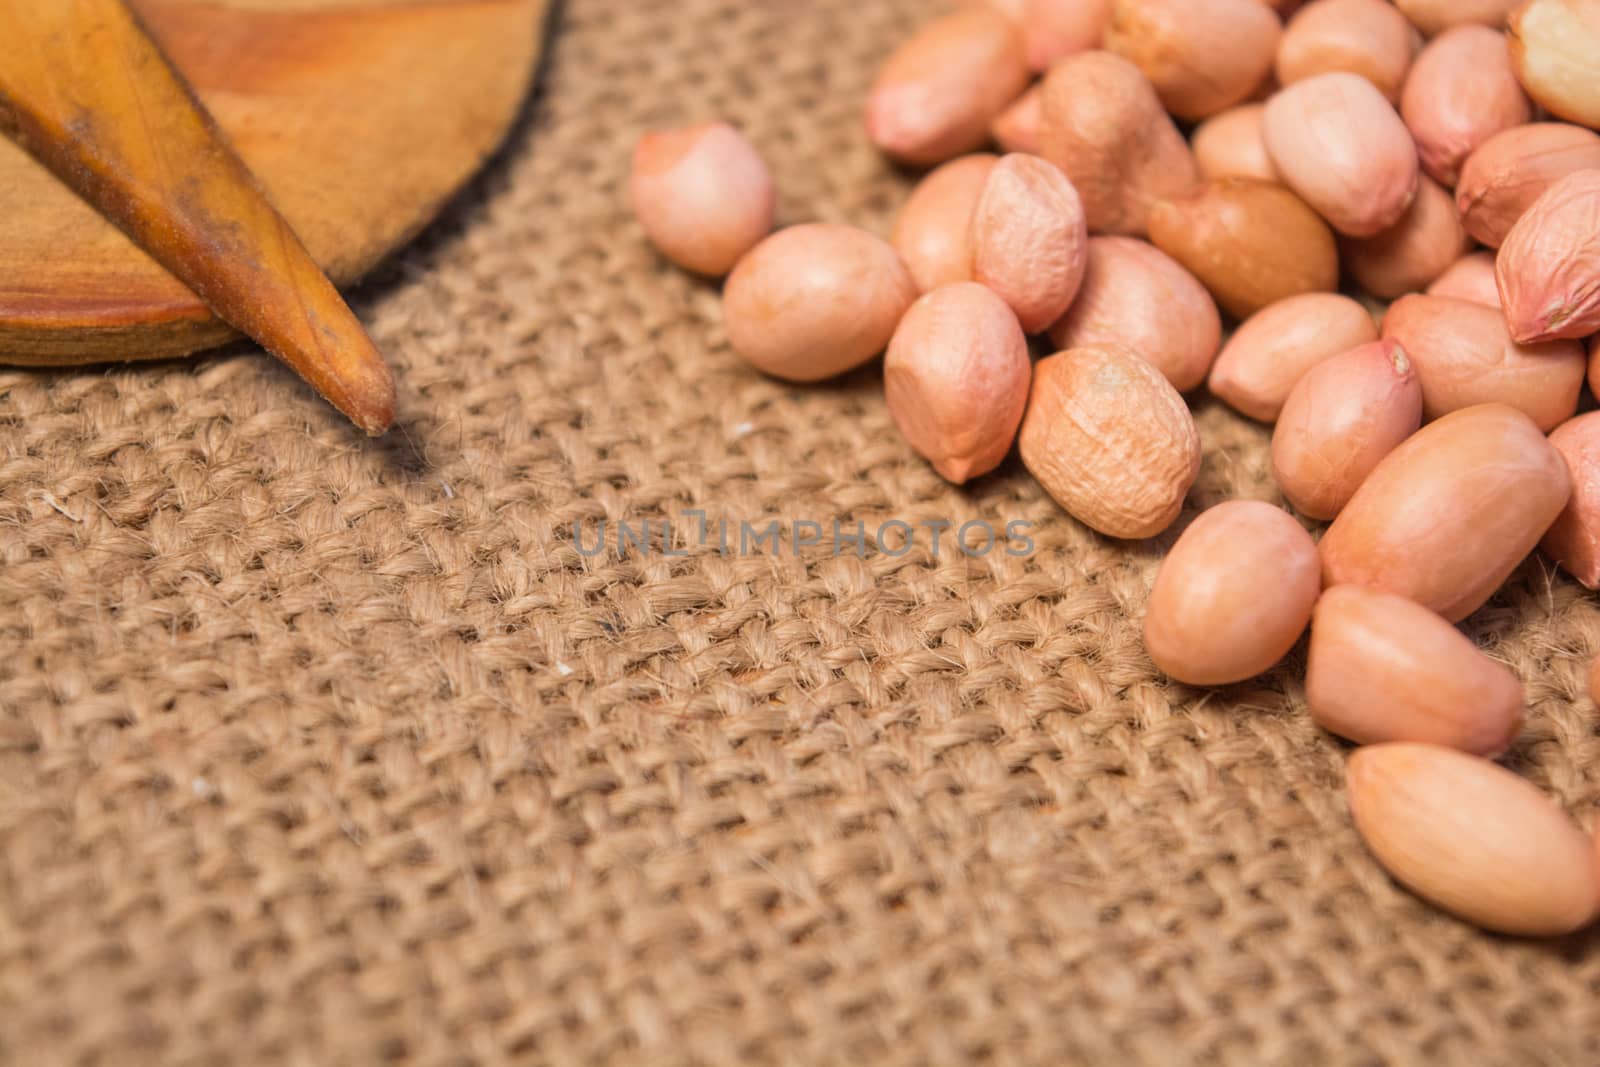 Group of Garlic and grounnuts with some props on sackcloth for food. by lakshmiprasad.maski@gmai.com